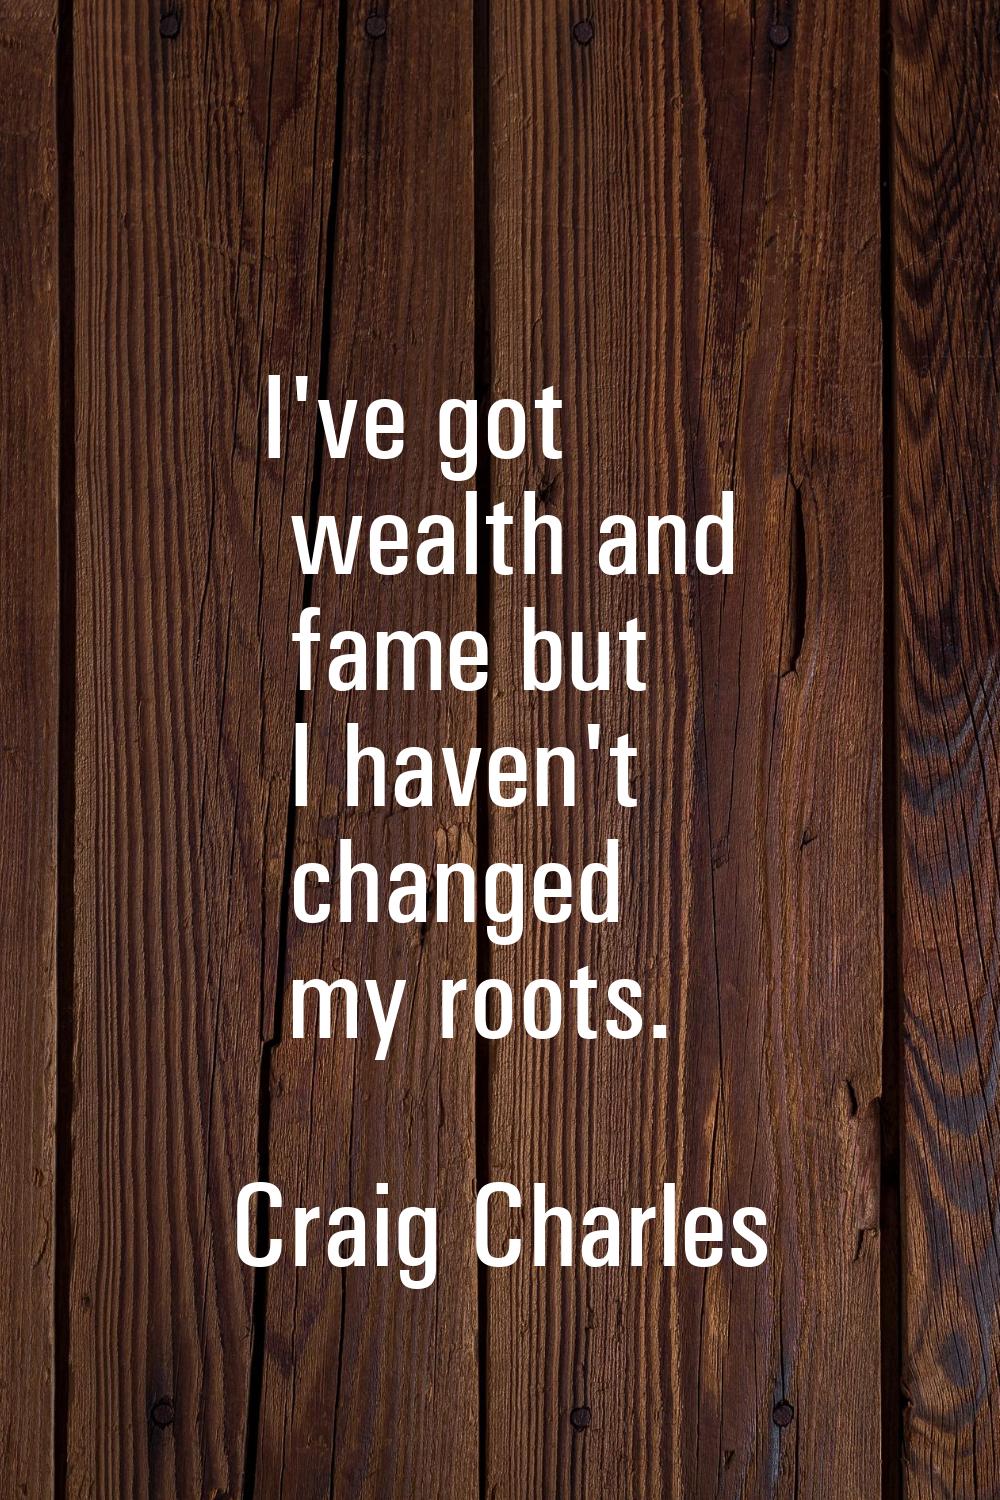 I've got wealth and fame but I haven't changed my roots.